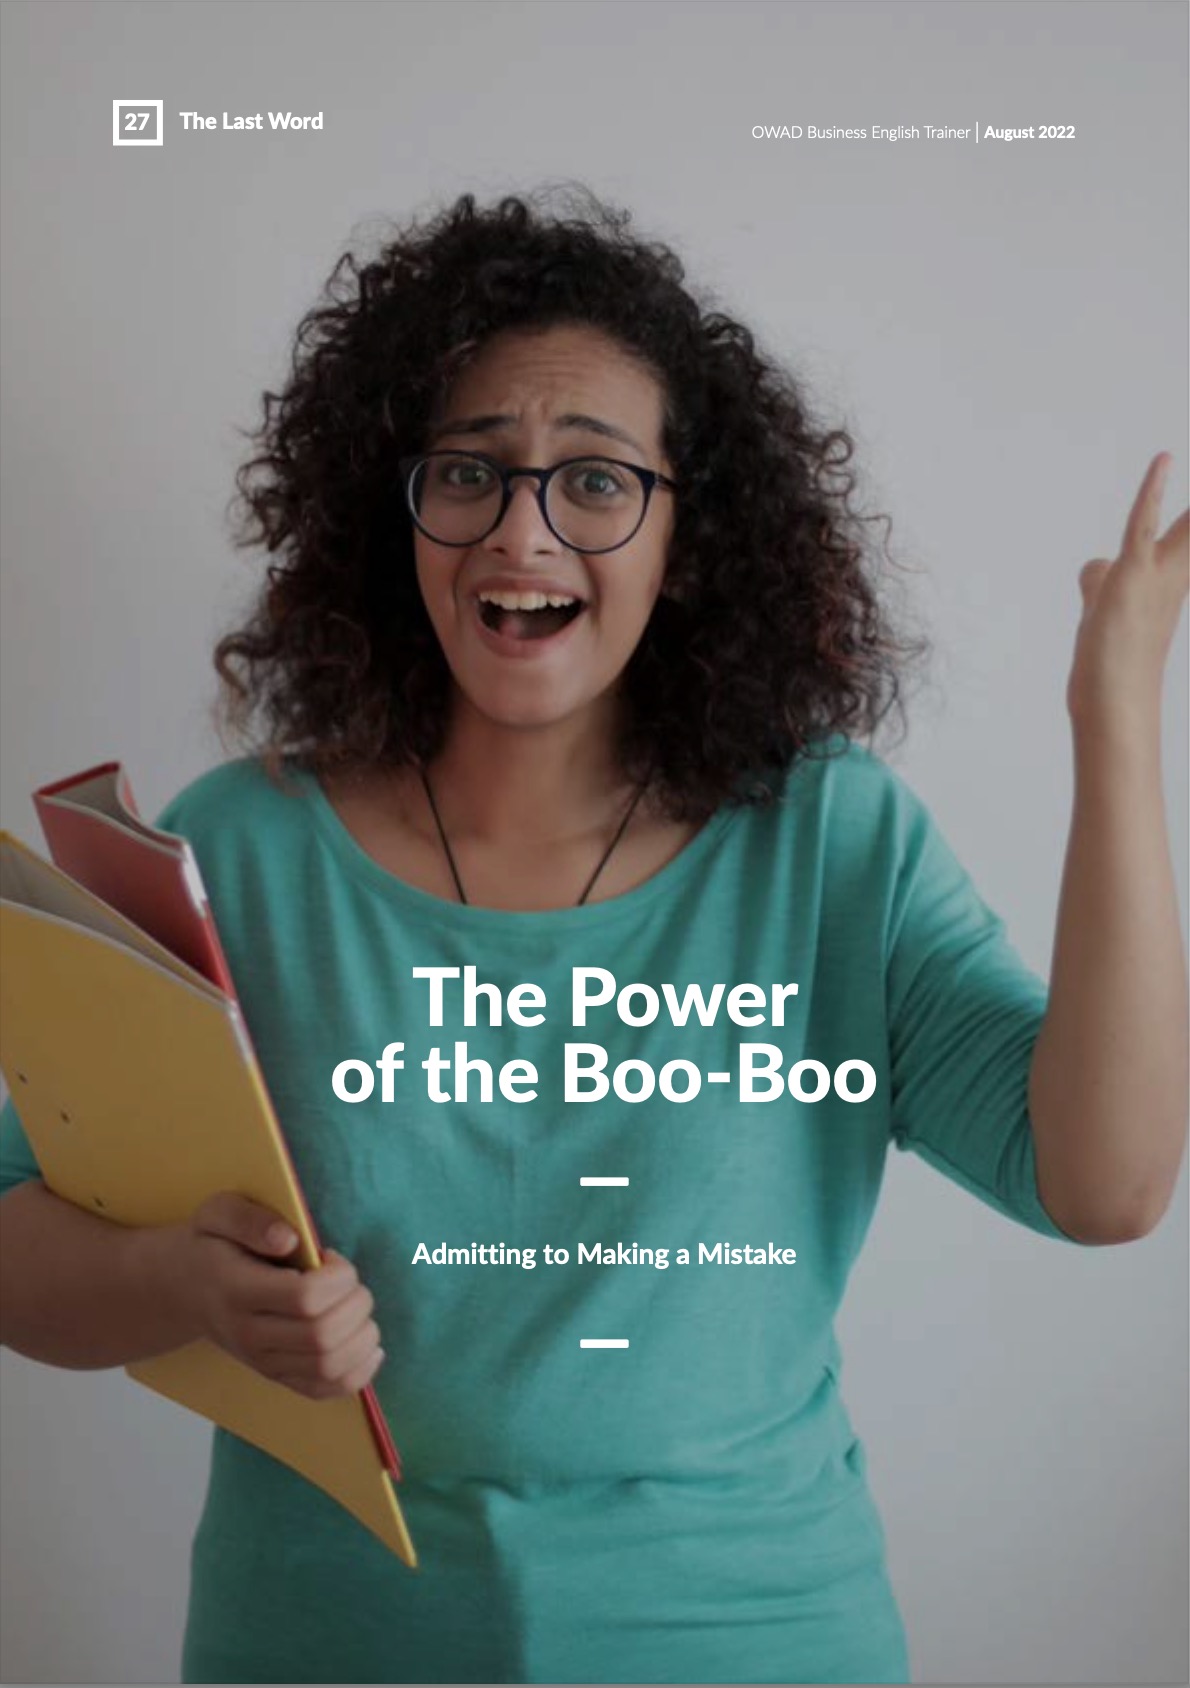 The Power of the Boo-Boo